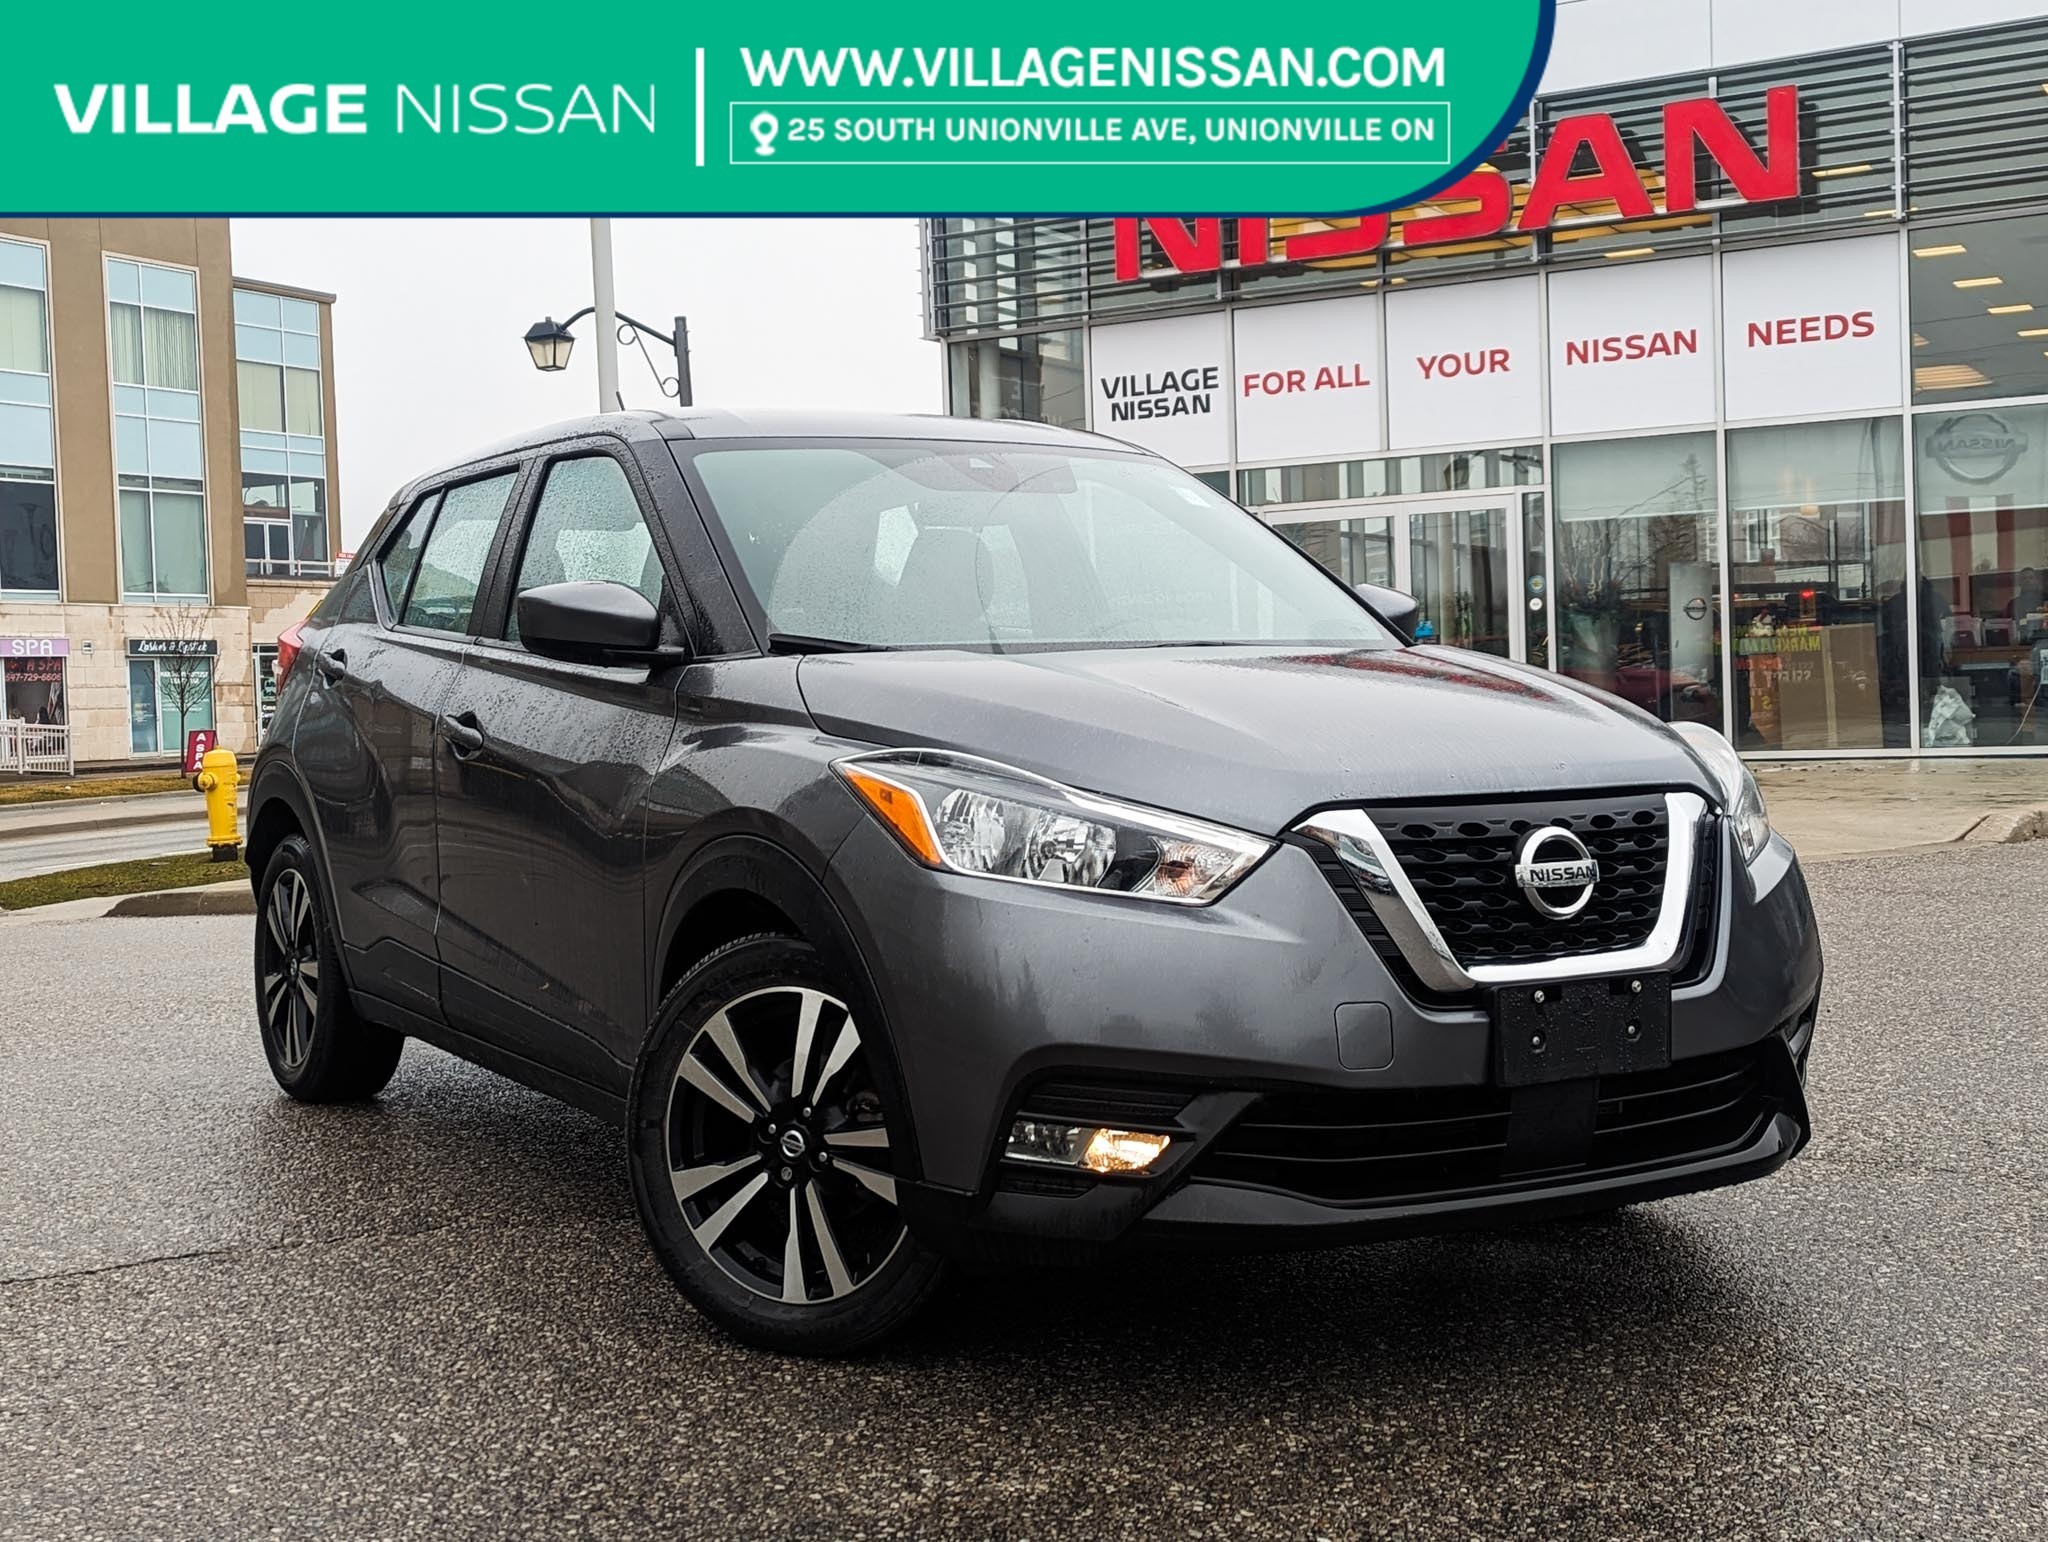 2020 Nissan Kicks ONE OWNER | LOW MILEAGE | DEALER MAINTAINED